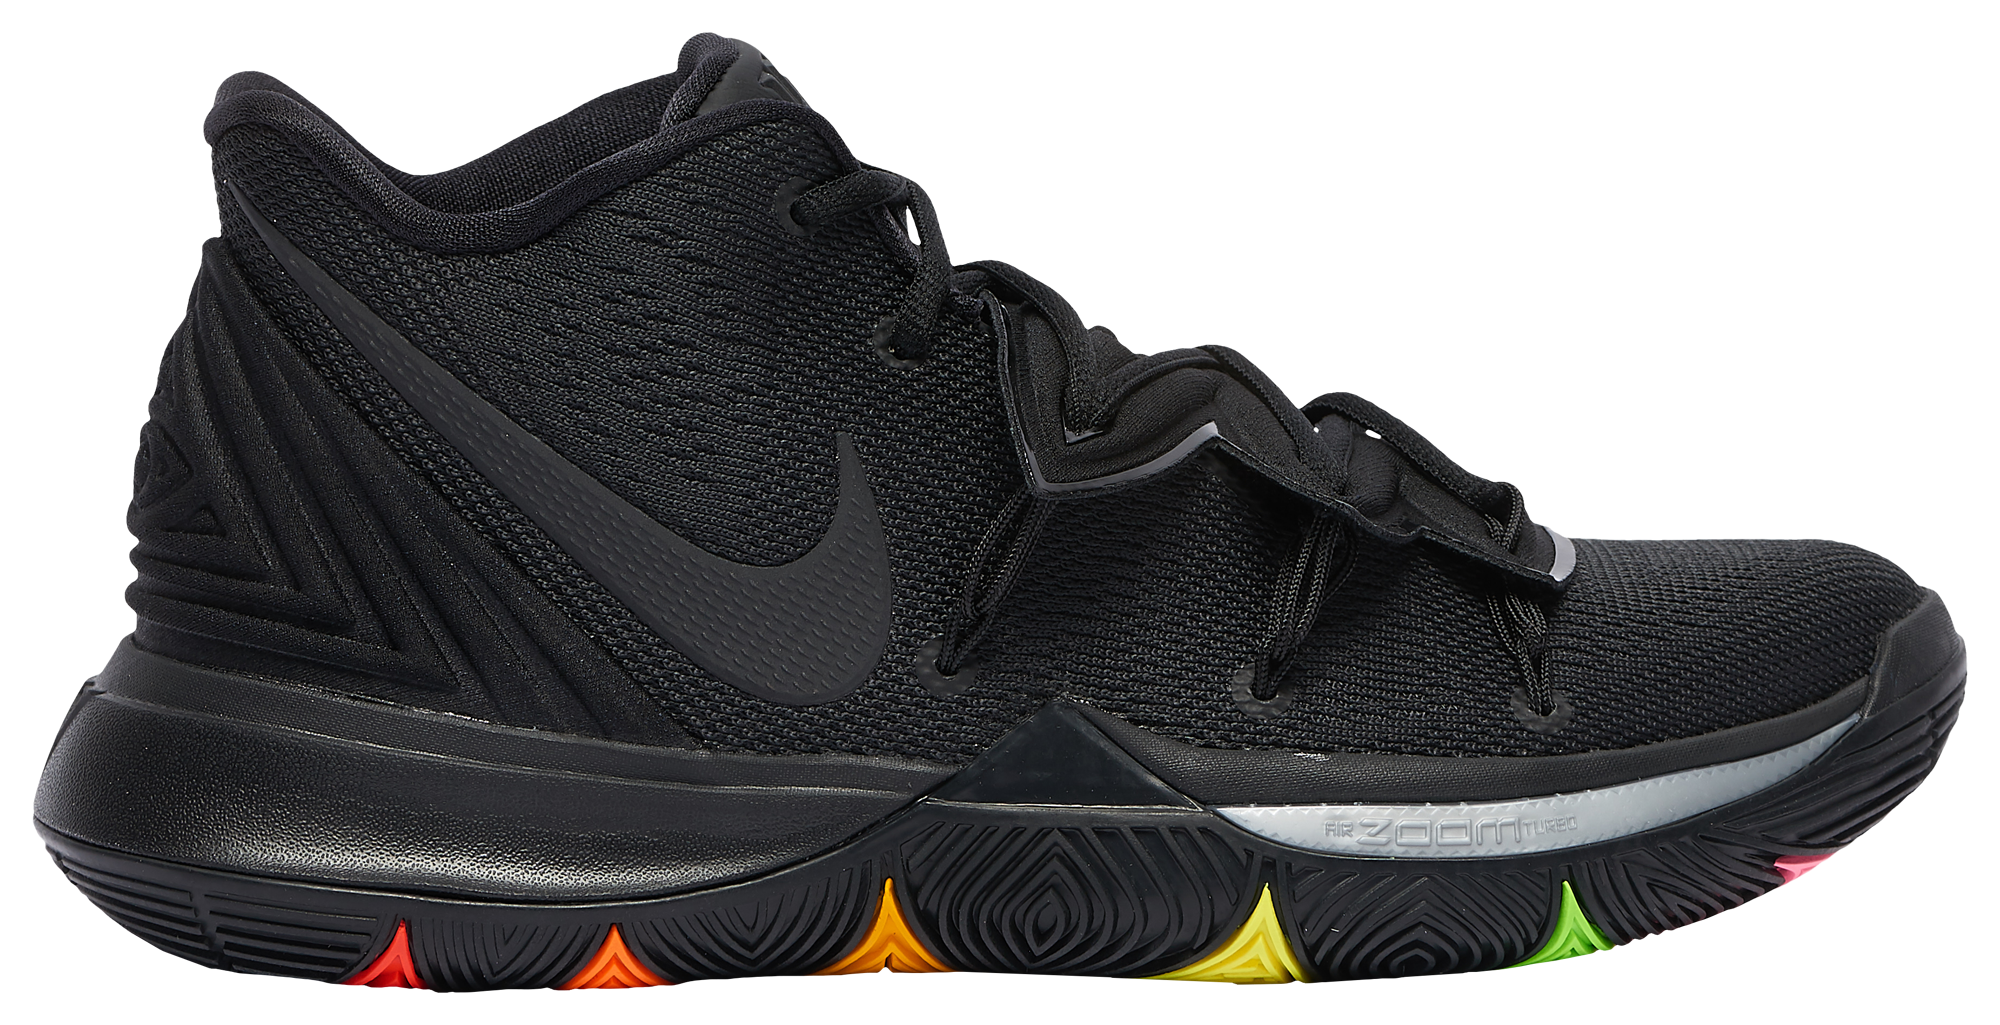 Nike Kyrie 5 Just Do It PS AQ2458 003 StockX